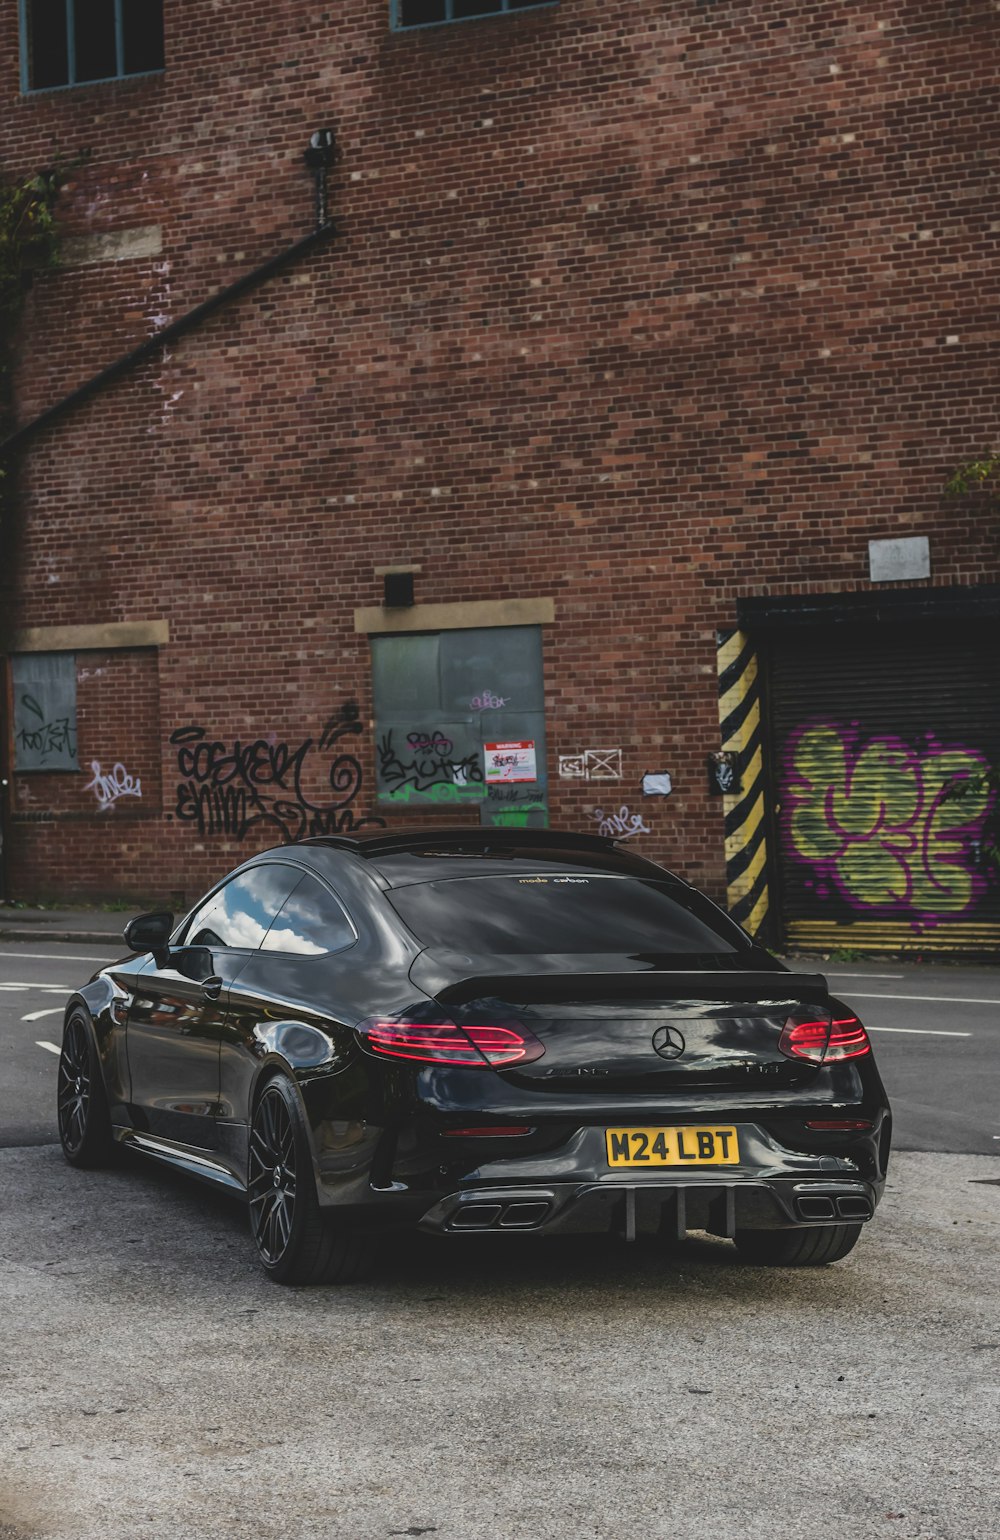 a black sports car parked in front of a brick building